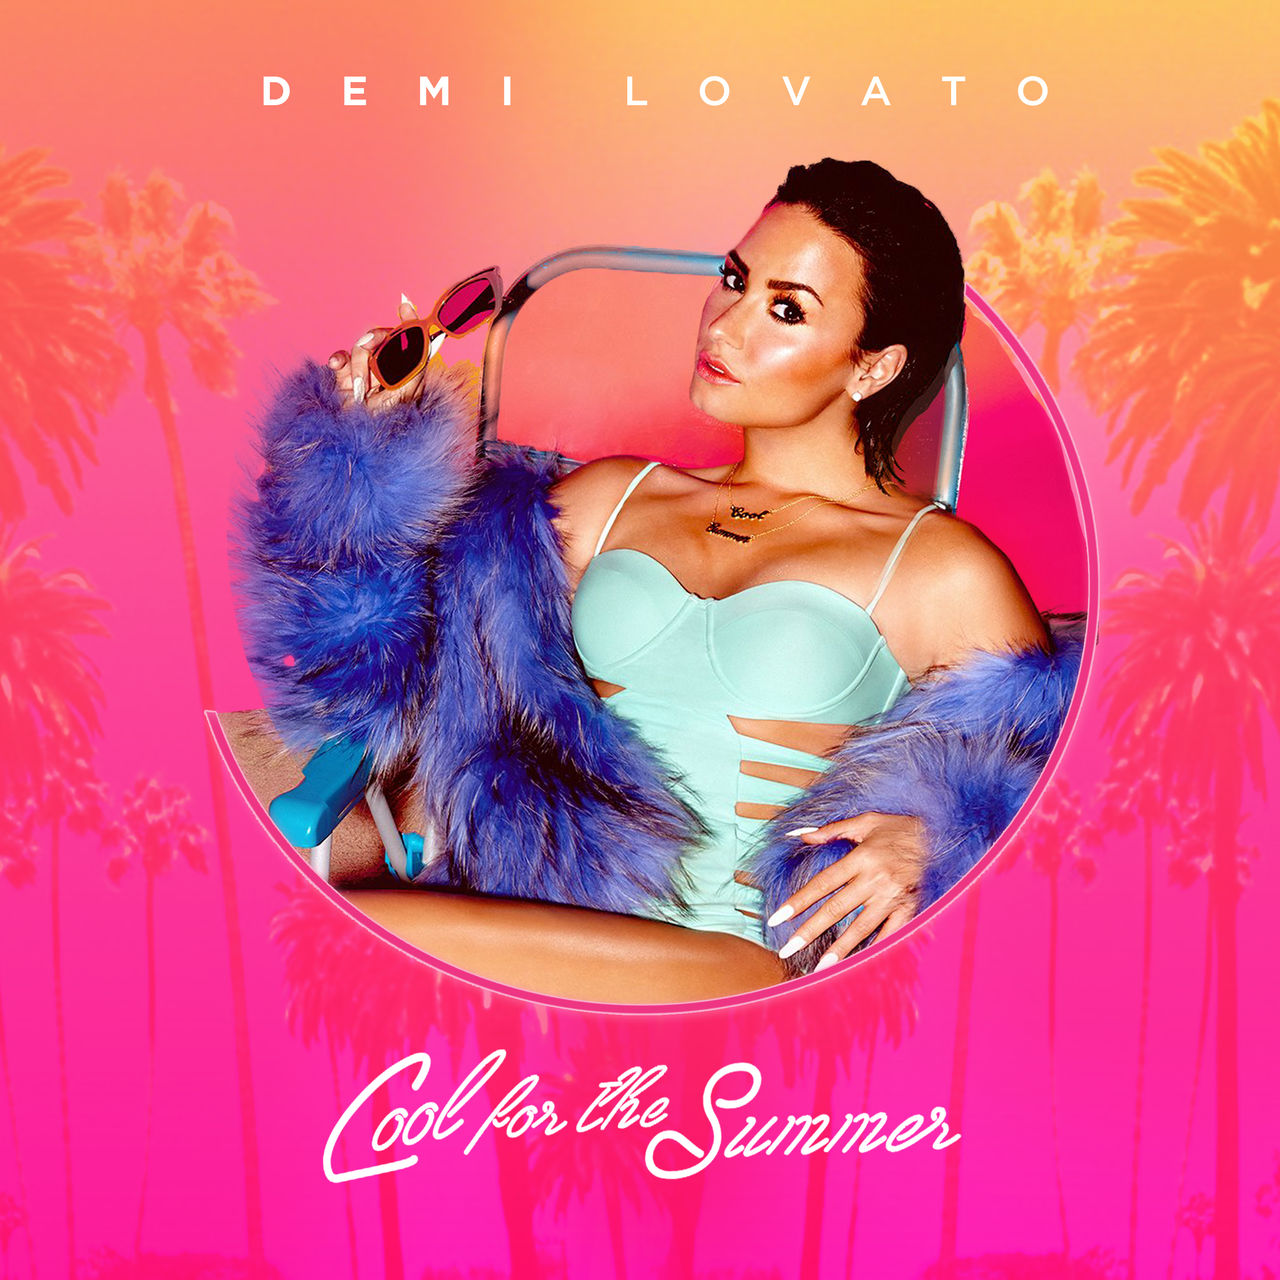 Demi lovato cool for the summer